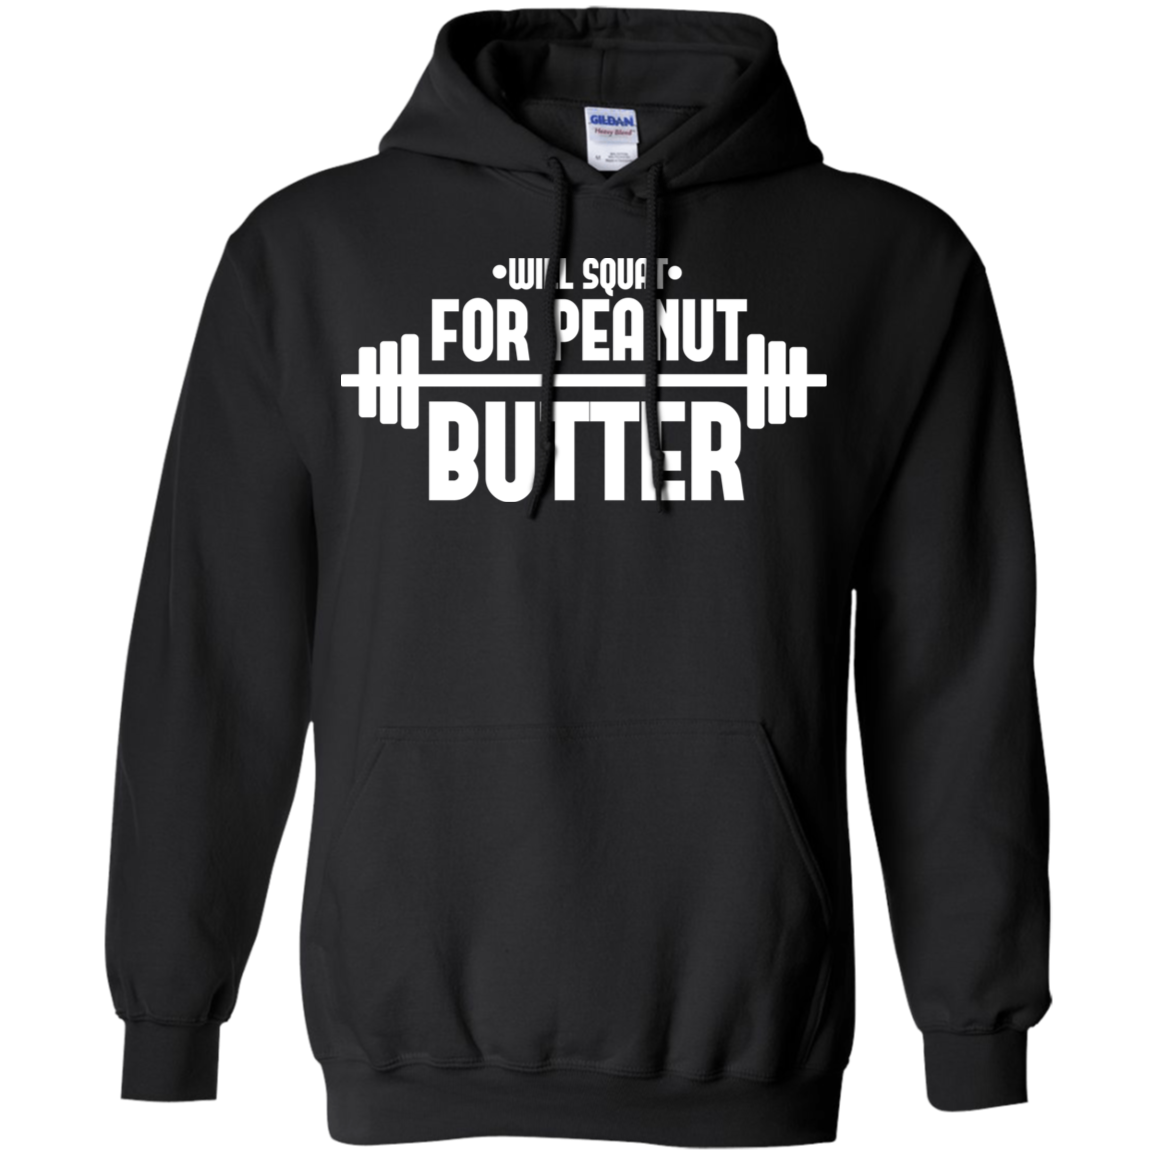 Will Squat For Peanut Butter Gym Workout Pullover Hoodie 8 oz.